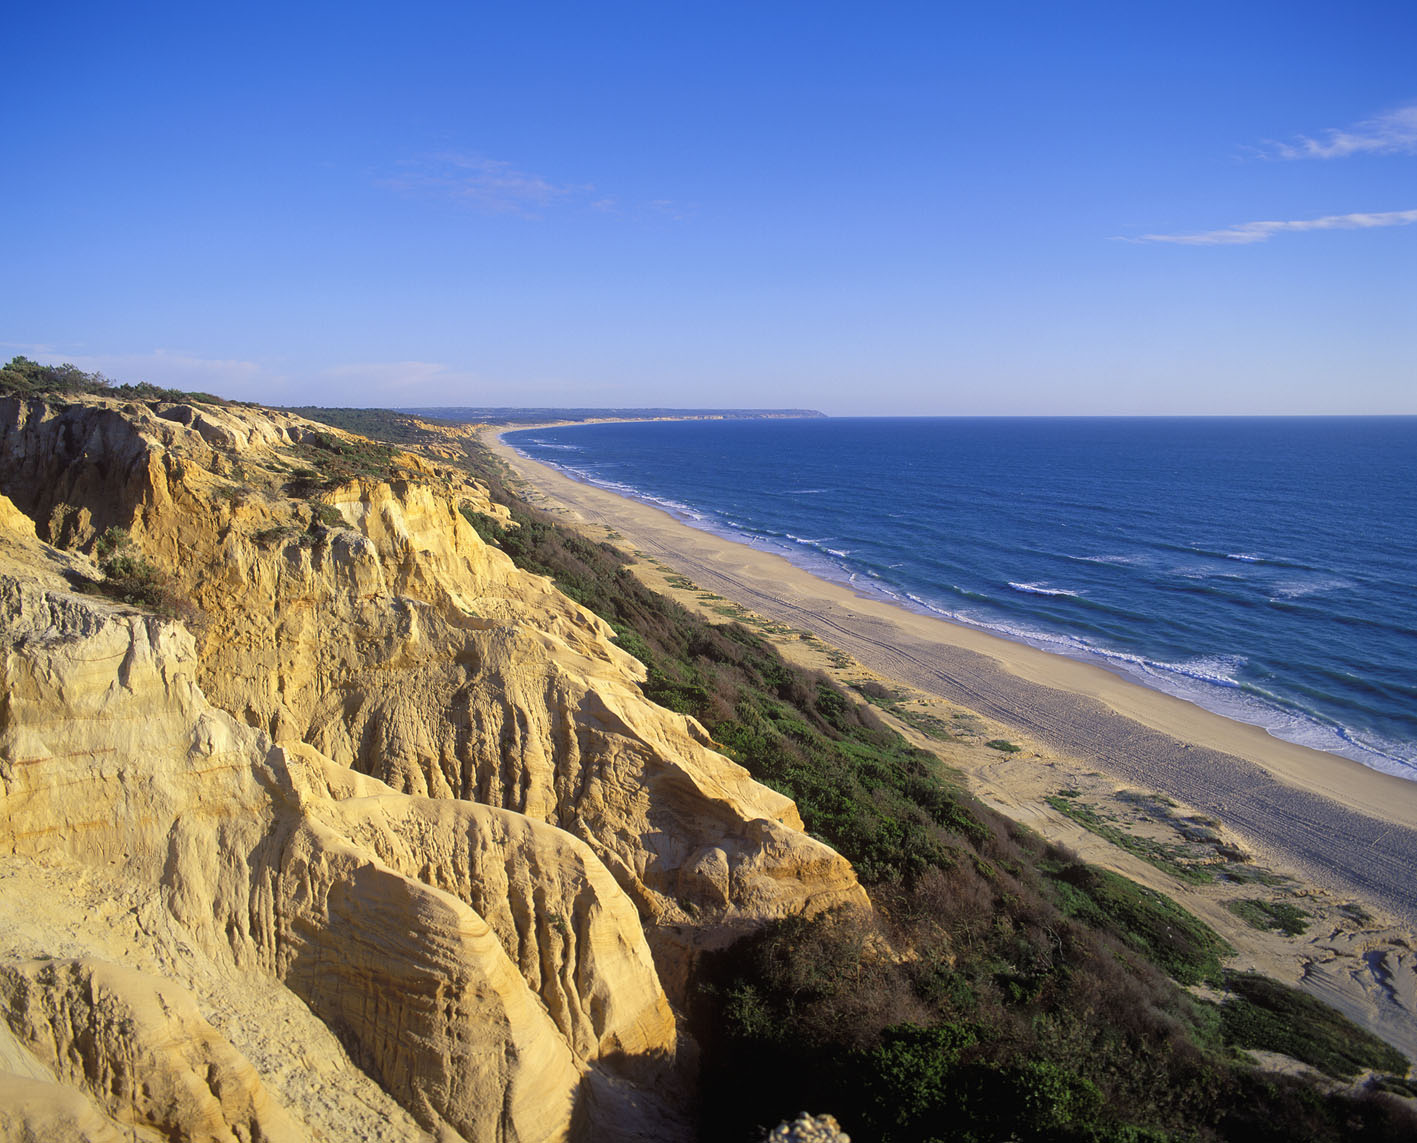 A long stretch of sandy coastline viewed from rocky hills. A thin sliver of grass and shrubs separates the hills from the beach. There are small white-capped waves in places. The sky is almost entirely clear of clouds.